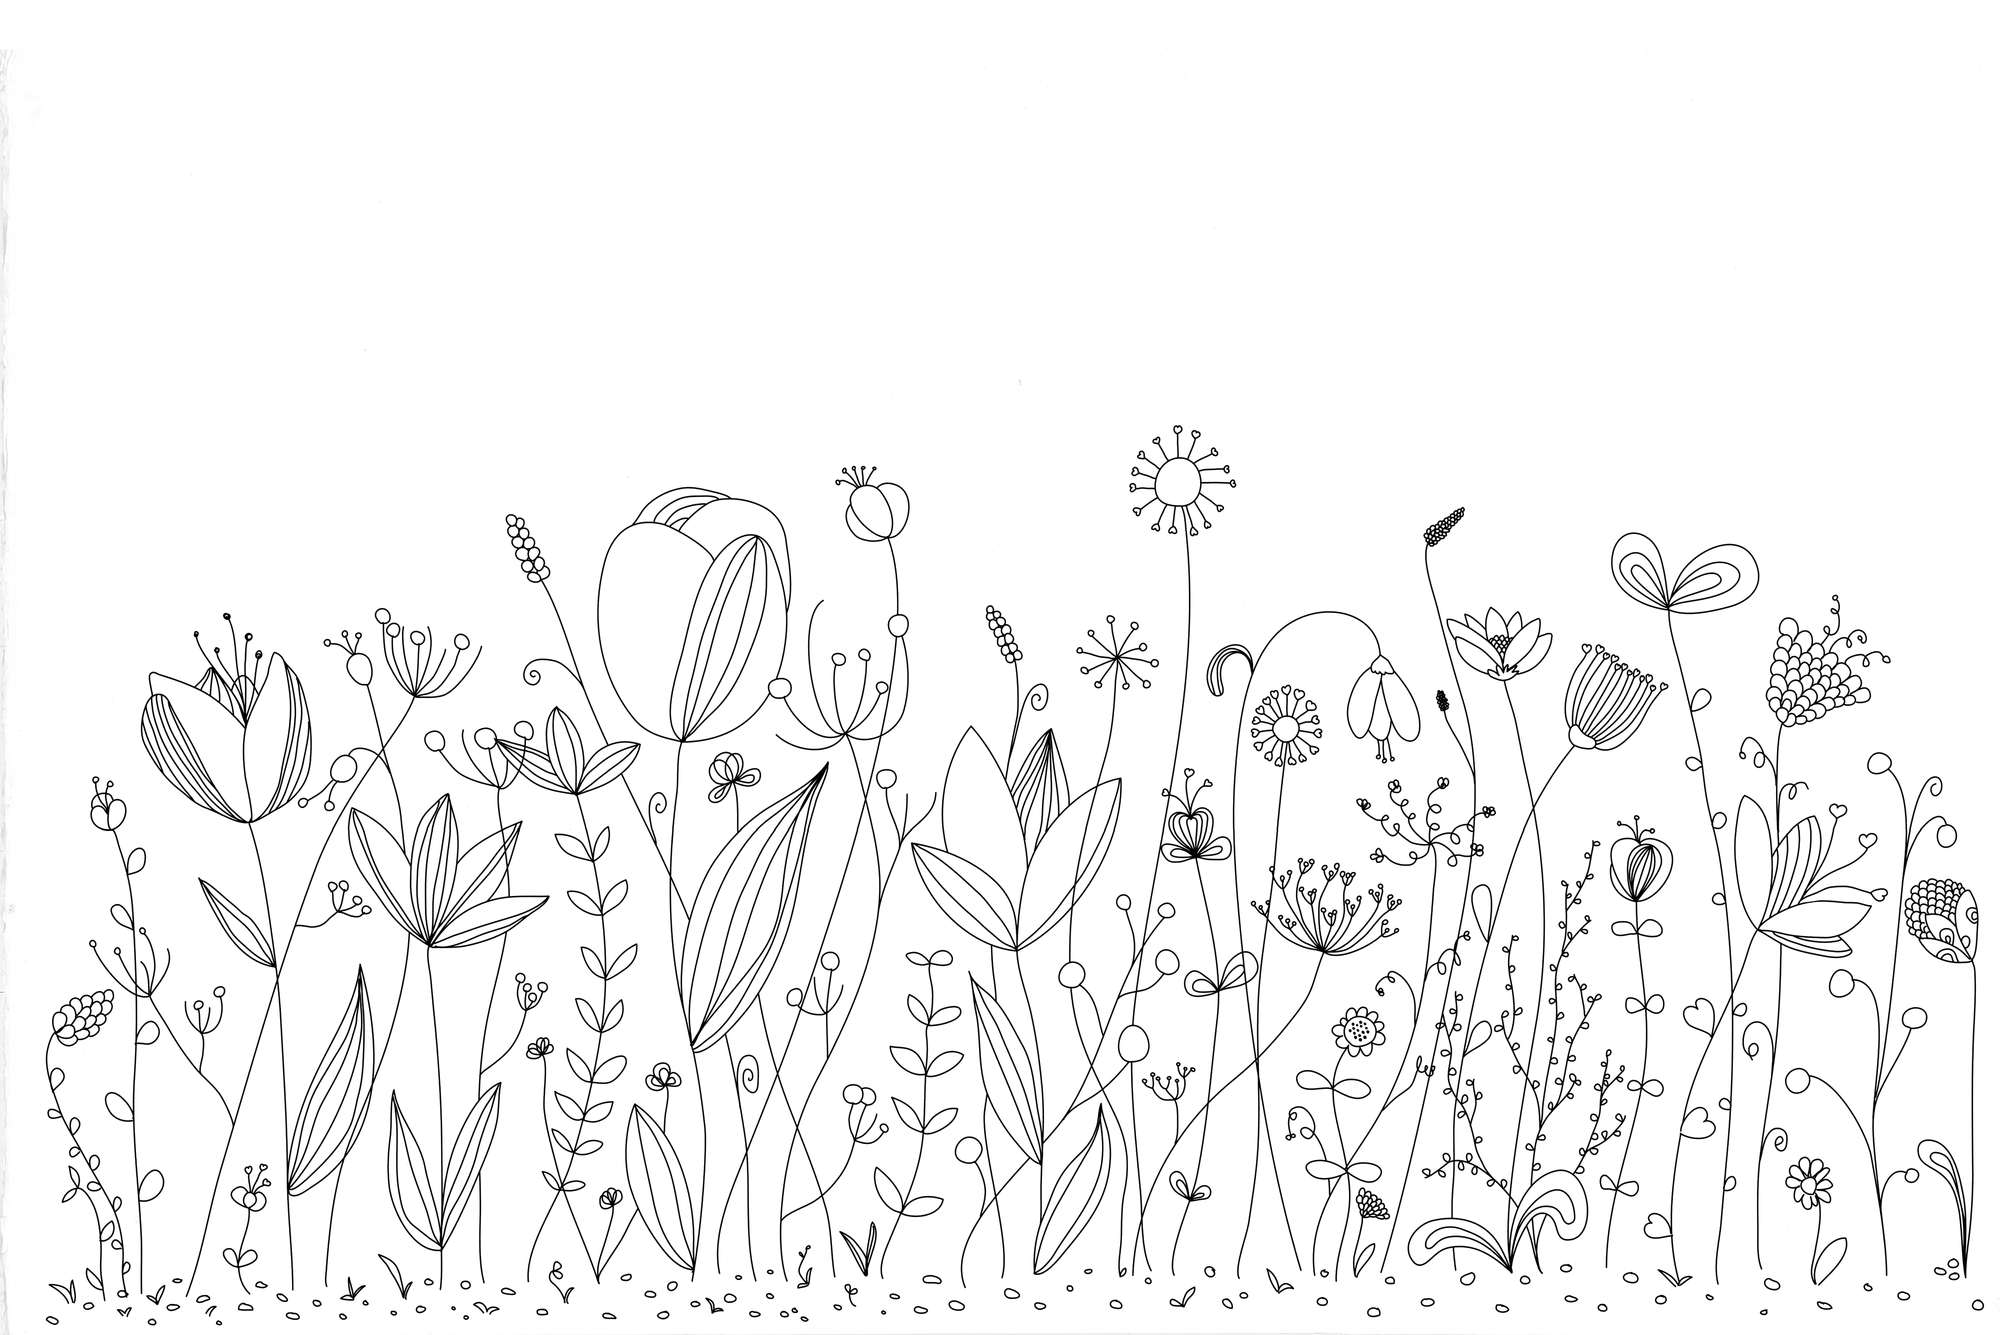             Kids mural with black and white drawn flowers on matte smooth vinyl
        